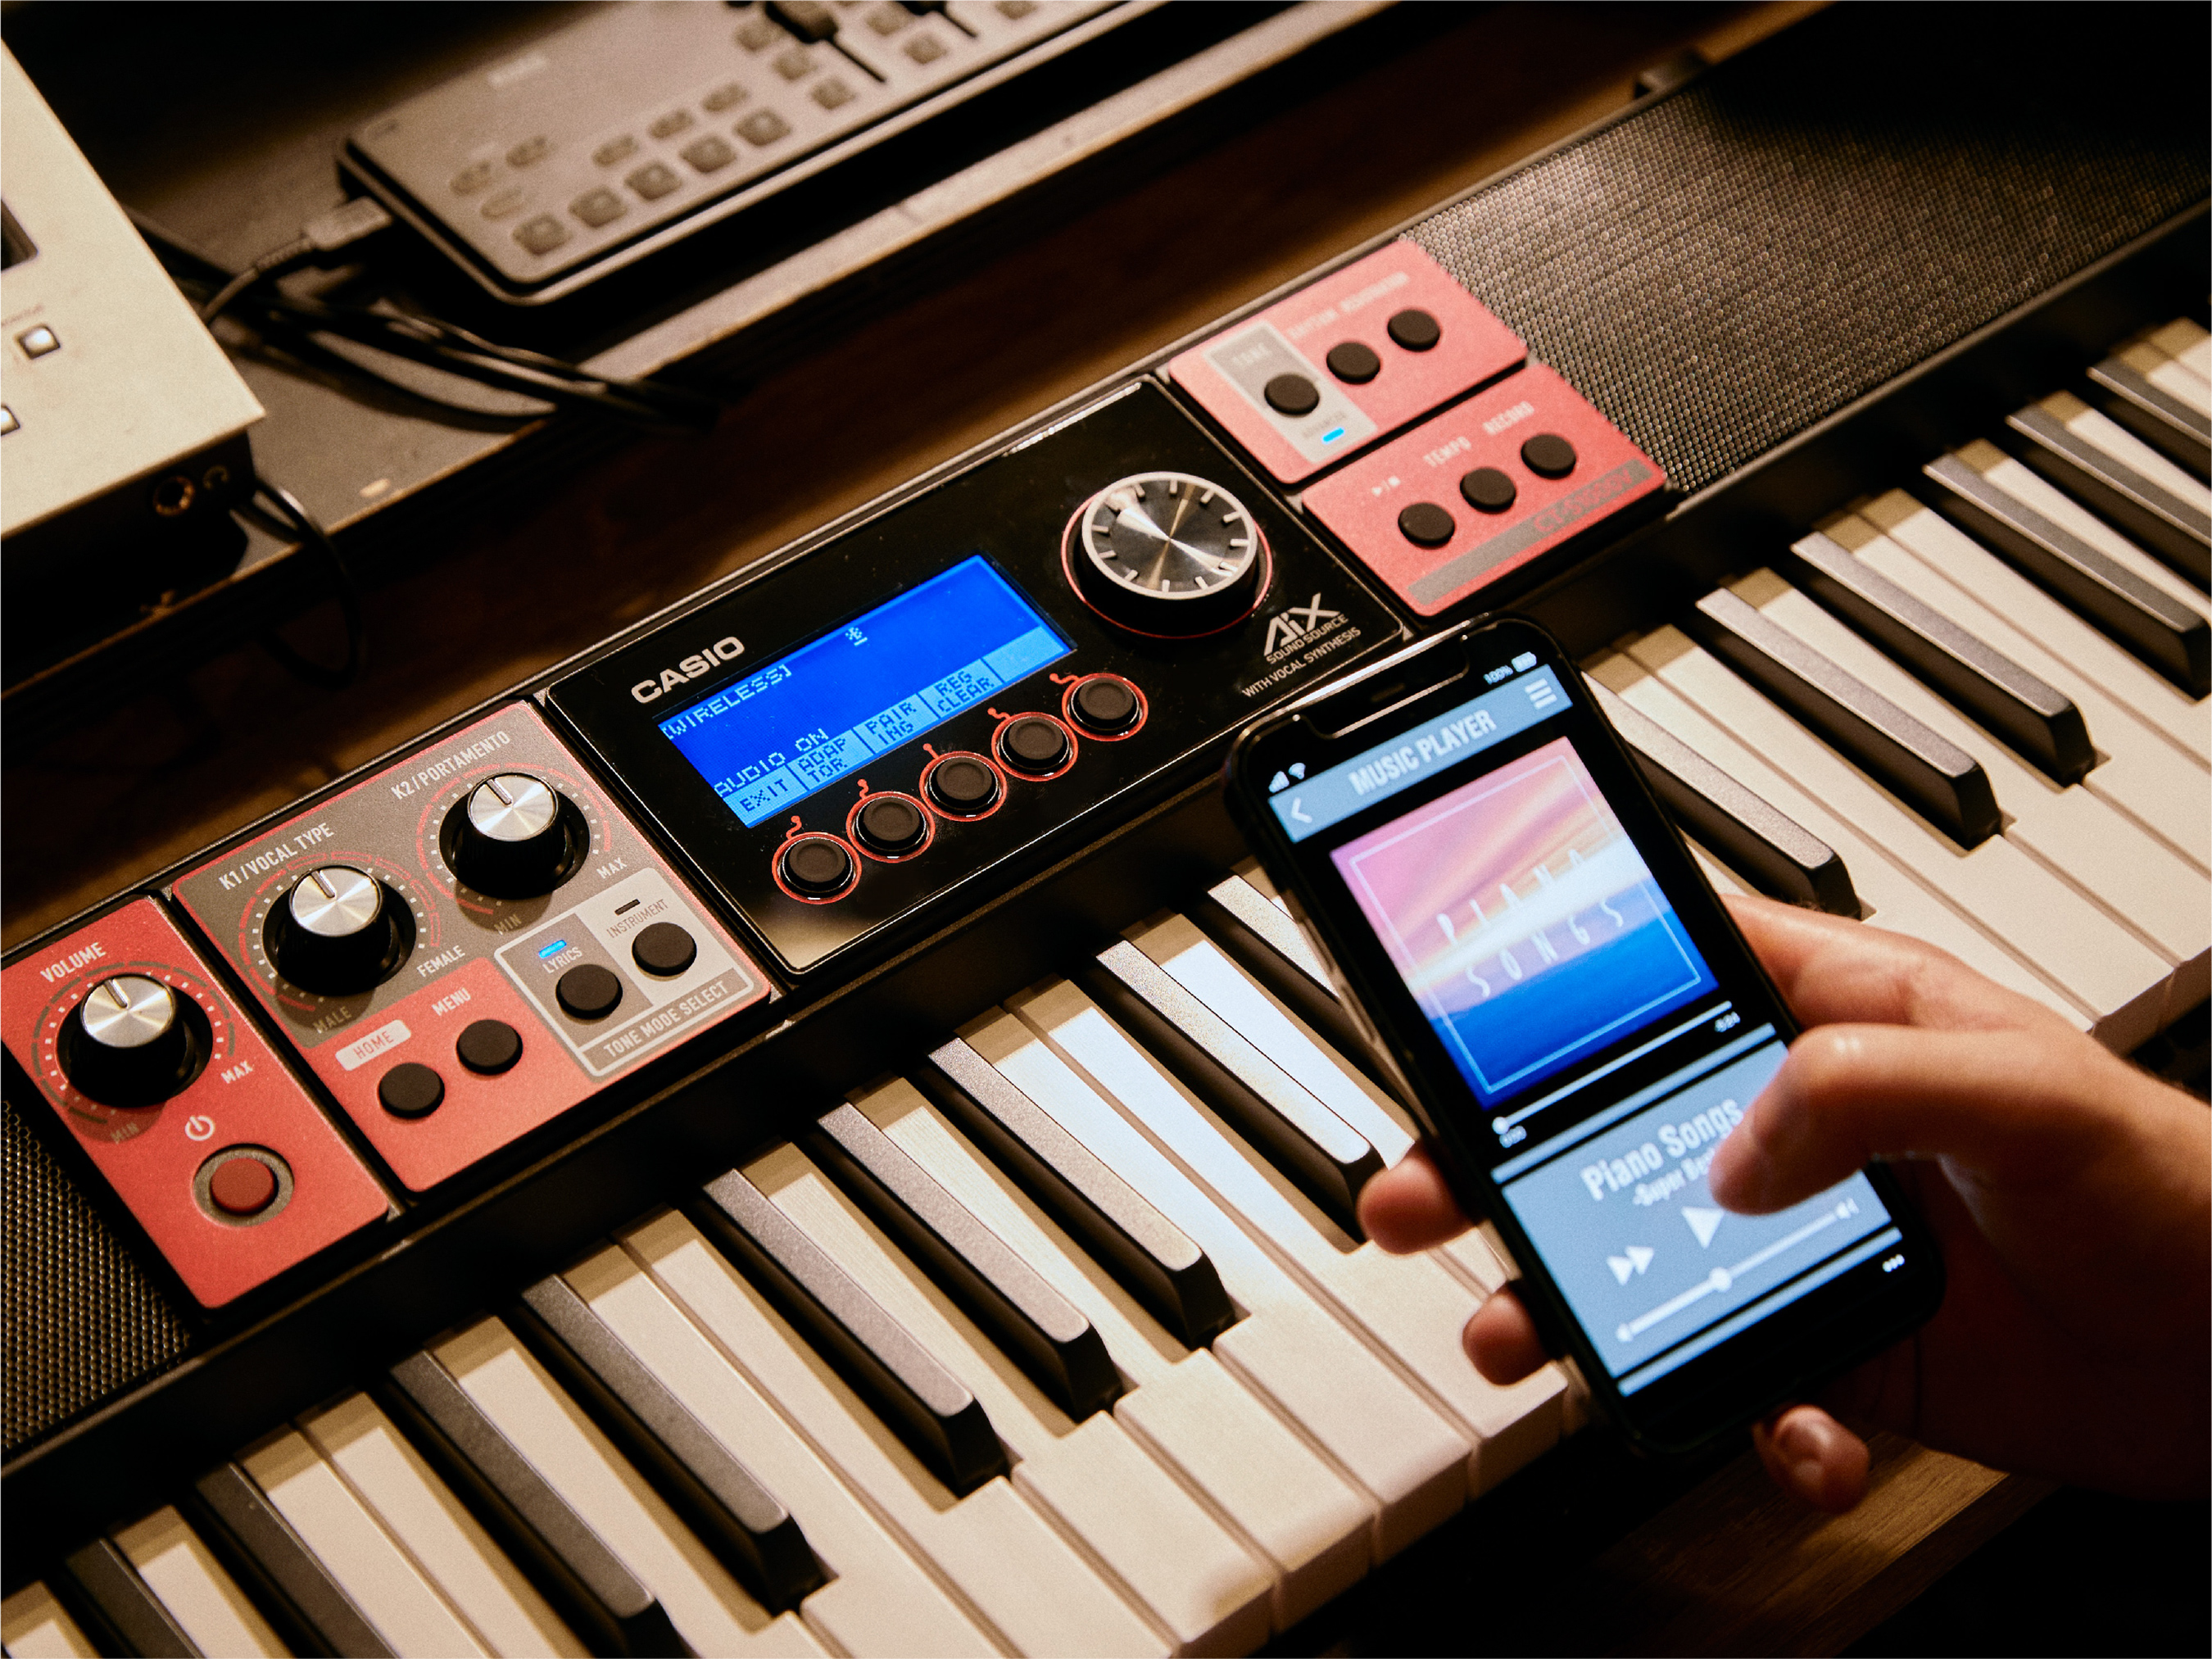 Casio has built 100 Lyric Tones (phrases inspired by familiar songs) into the CT-S1000V, which can be overwritten, and there’s space for 50 more brought in from the Lyric Creator app. Lyrics can be customized with note values per syllable, adjustable phonemes, and more.